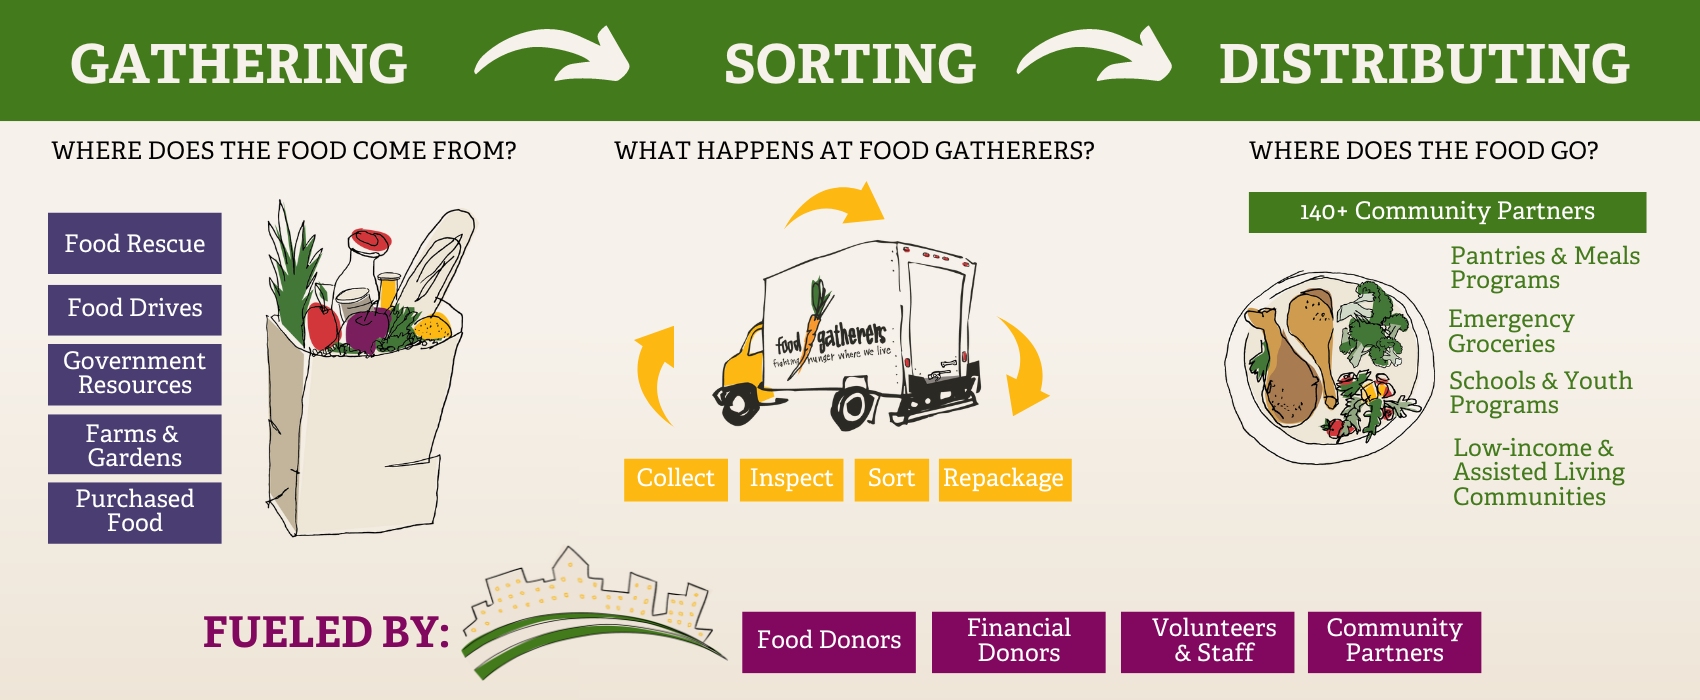 Infographic describing Food Gatherers' process of gathering, sorting, and distributing food.